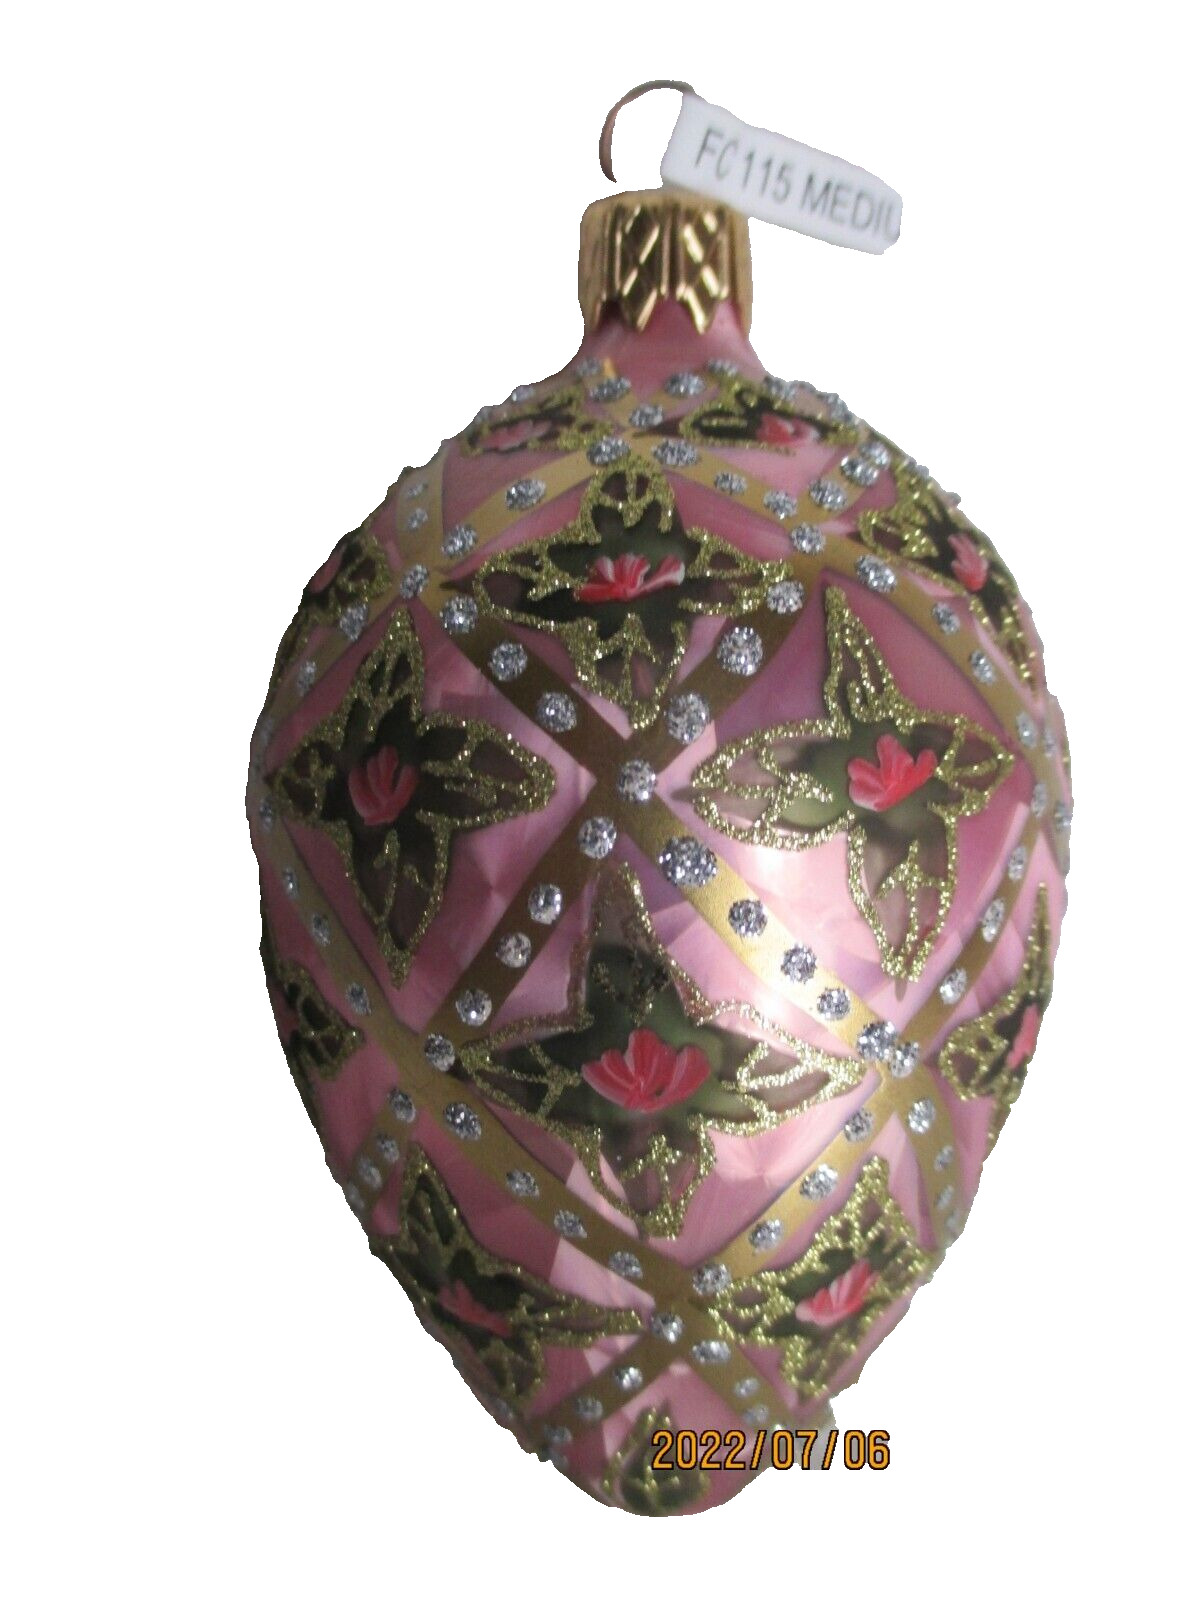 Forbes Collection Faberge 115 Medium Glass Egg Christmas Easter Ornament Poland